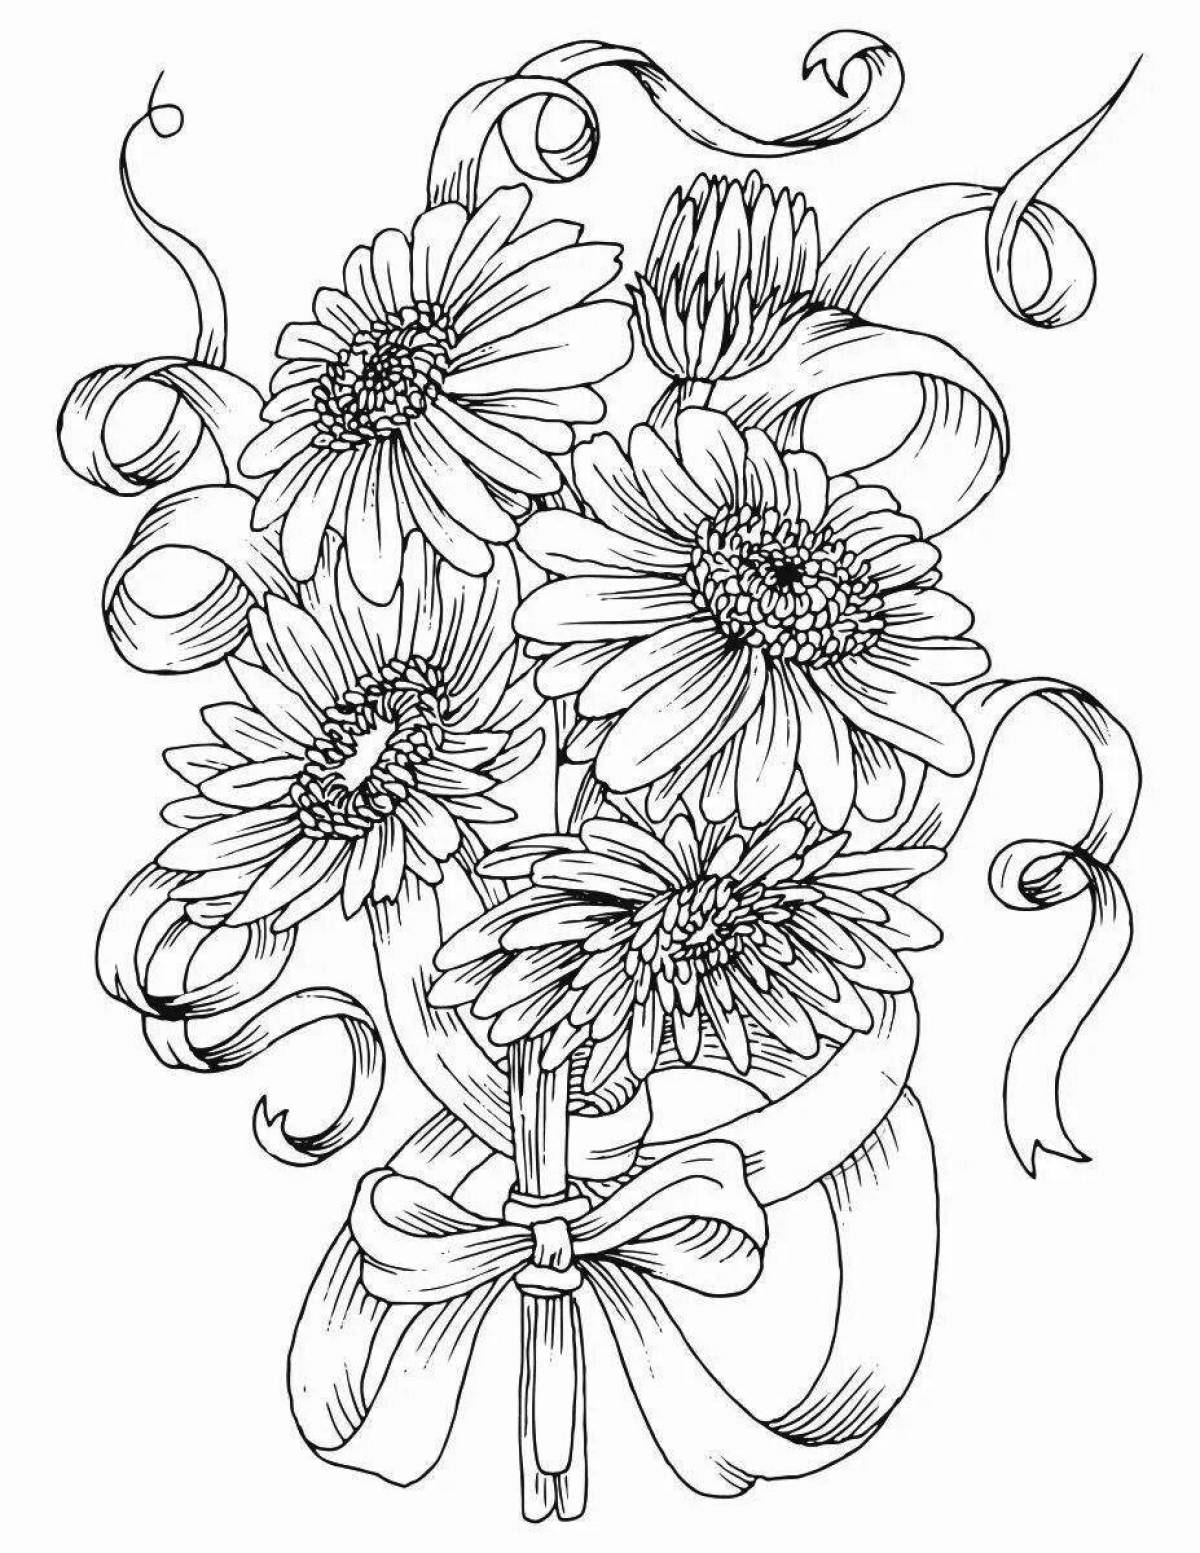 Radiant coloring page beautiful large bouquets of flowers